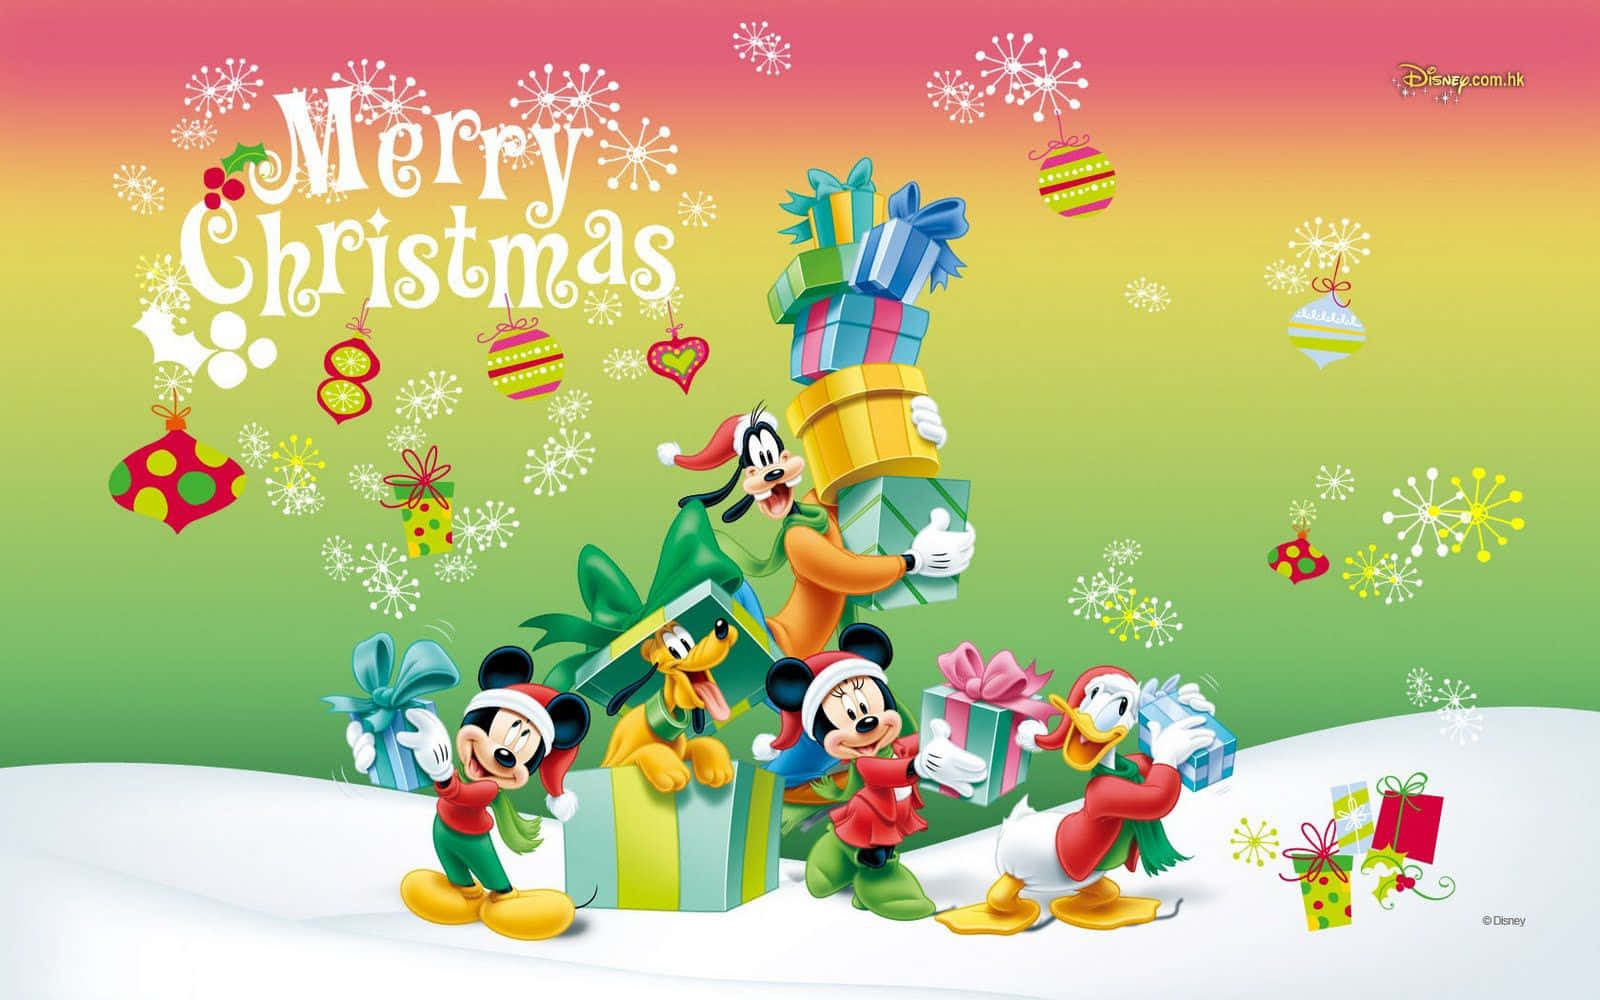 Spend the Holidays at Disney and Experience the Magic!